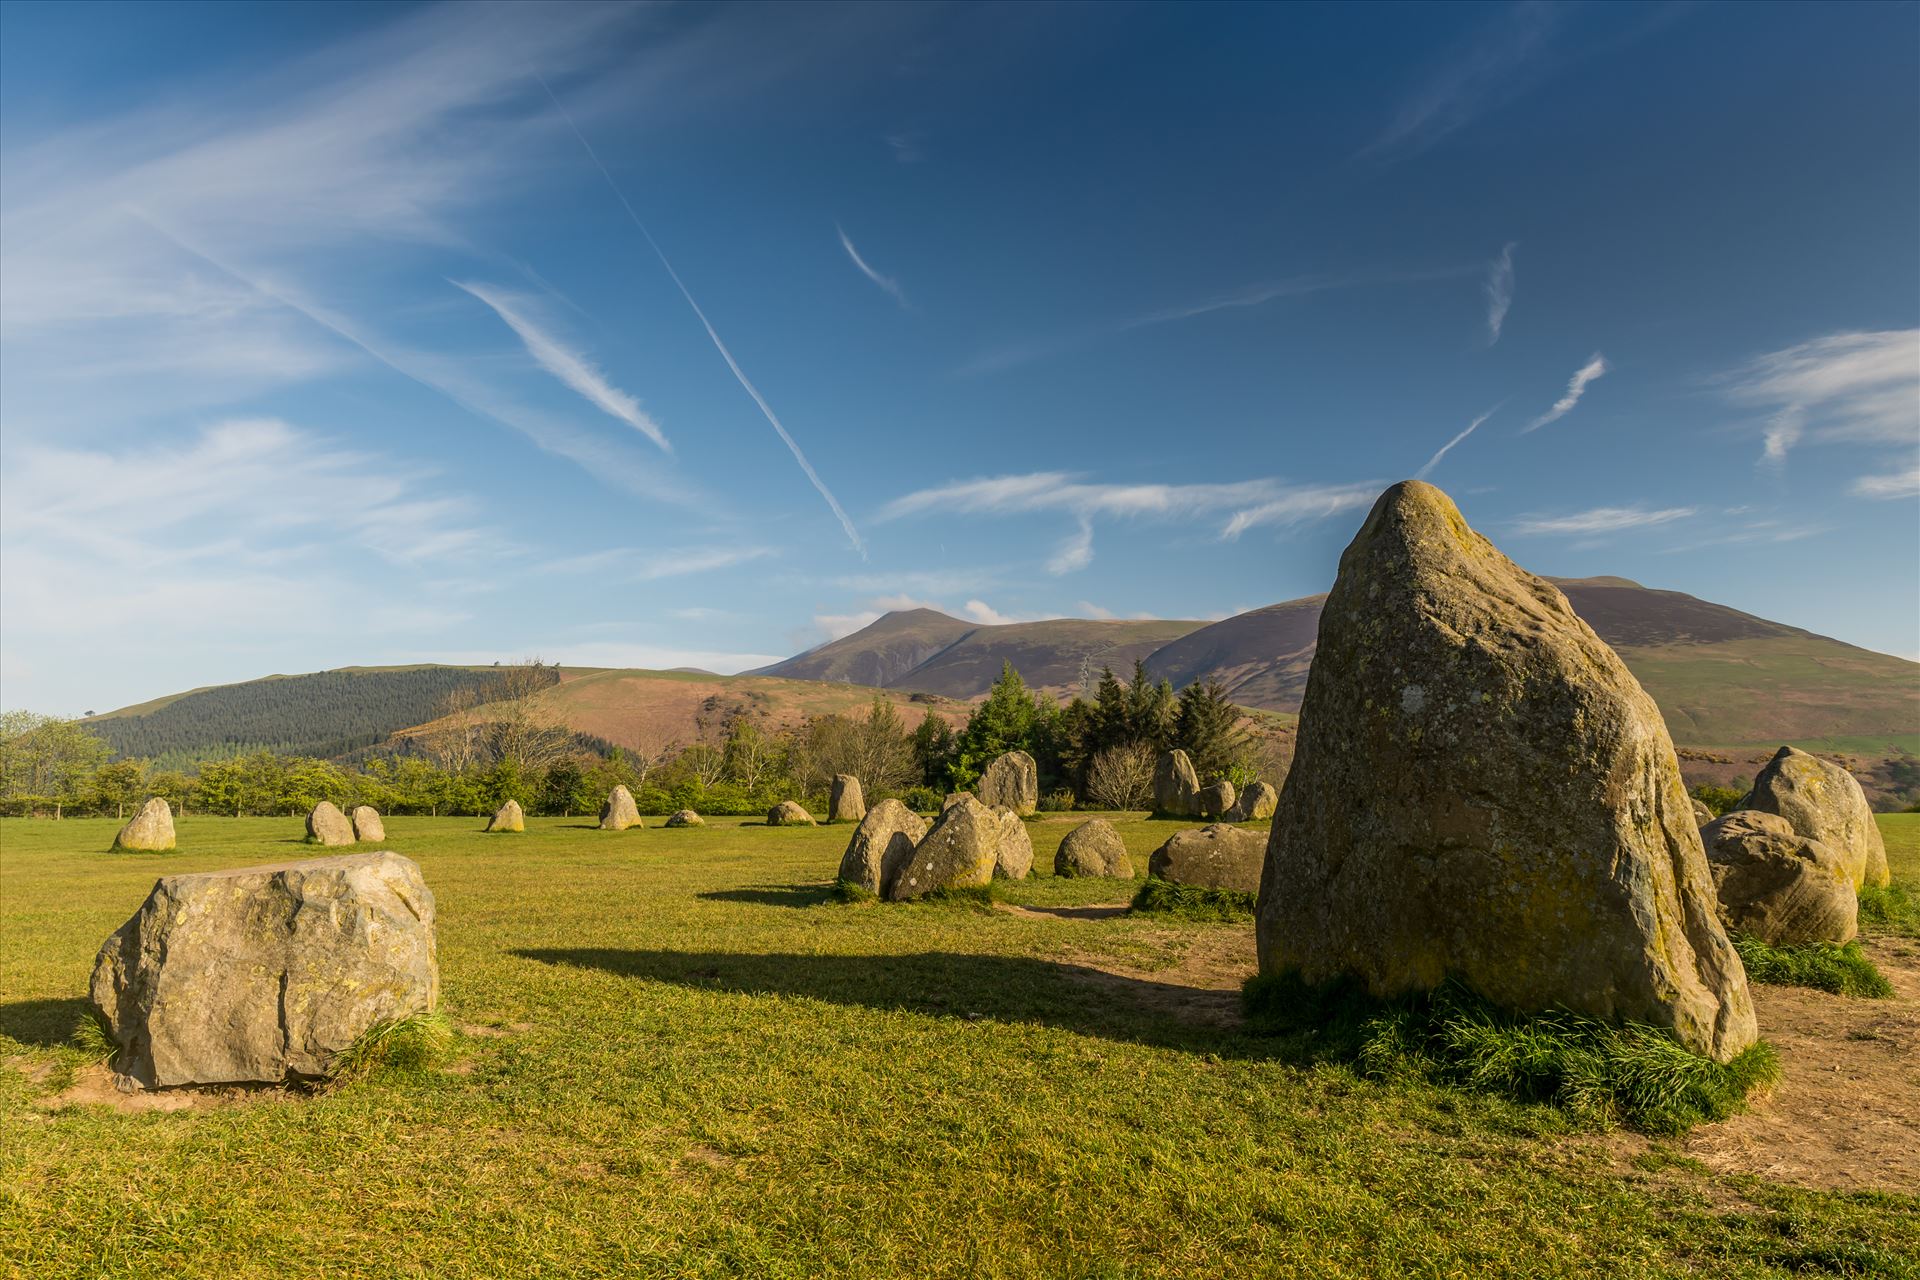 Castlerigg stone circle - One of around 1,300 stone circles in the British Isles, it was constructed as a part of a megalithic tradition that lasted from 3,300 to 900 BC, during the Late Neolithic and Early Bronze Ages. The stone circle is situated nr Keswick by philreay